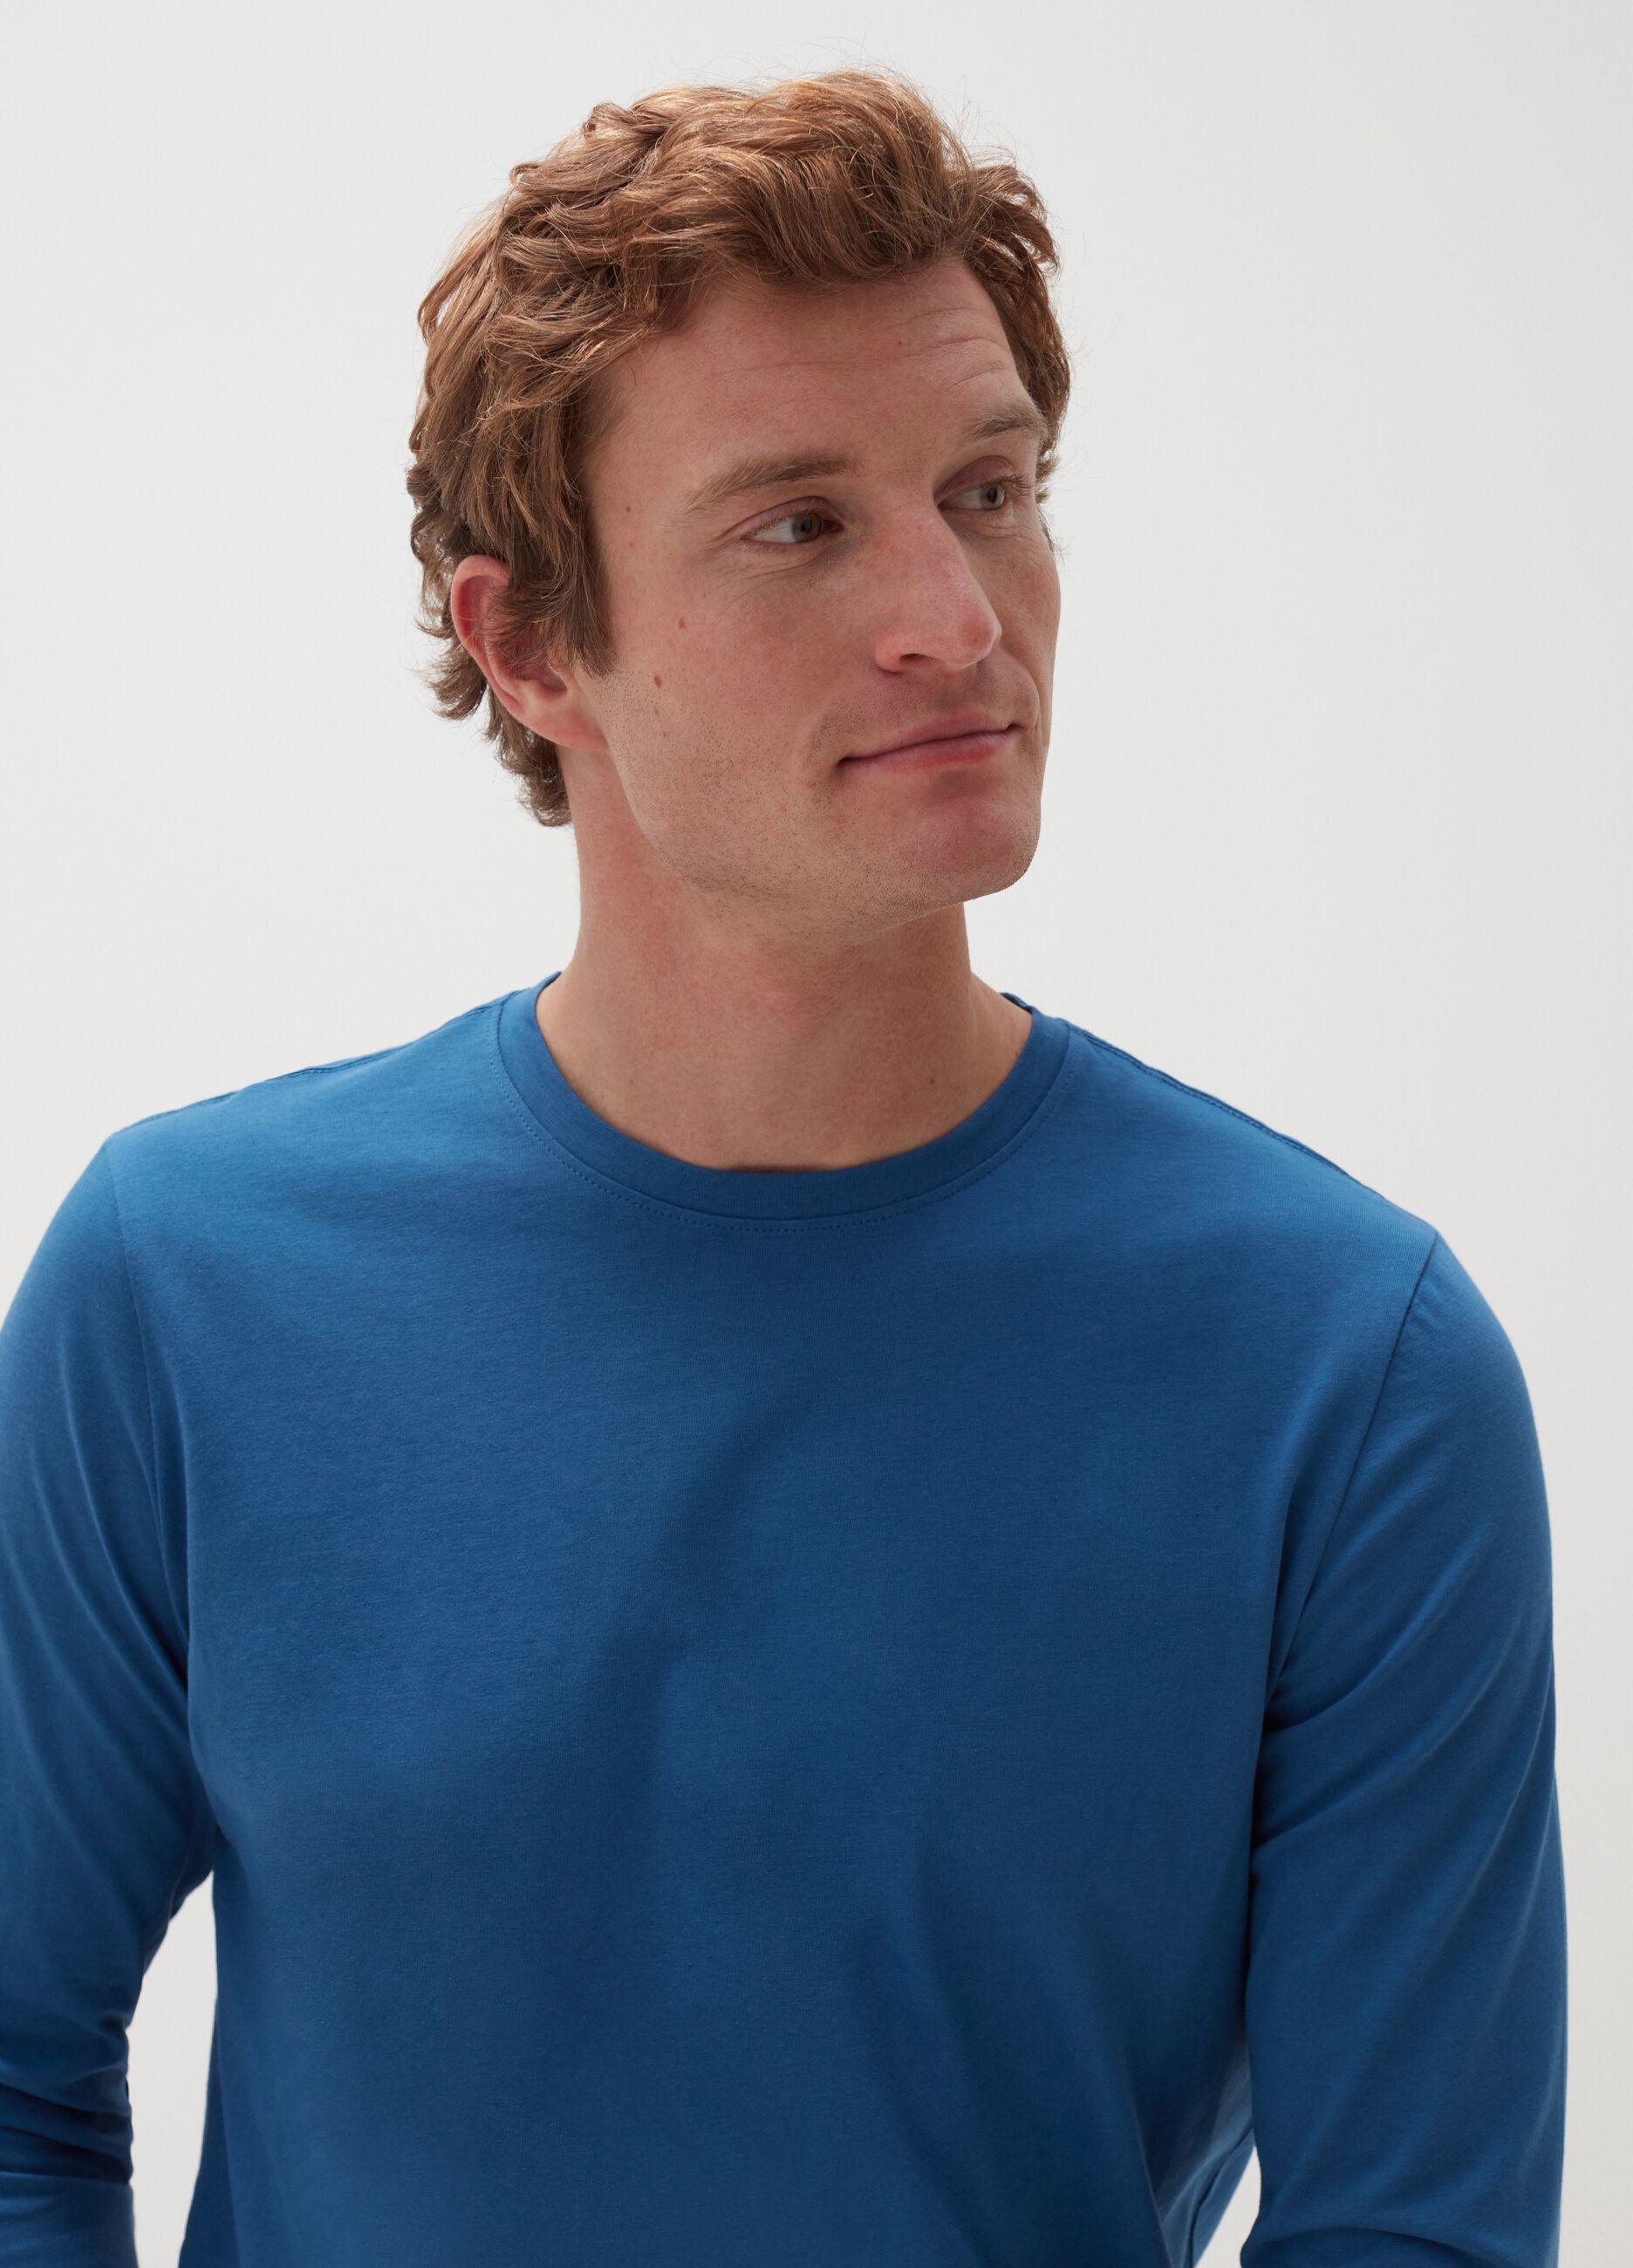 Long-sleeved T-shirt in cotton